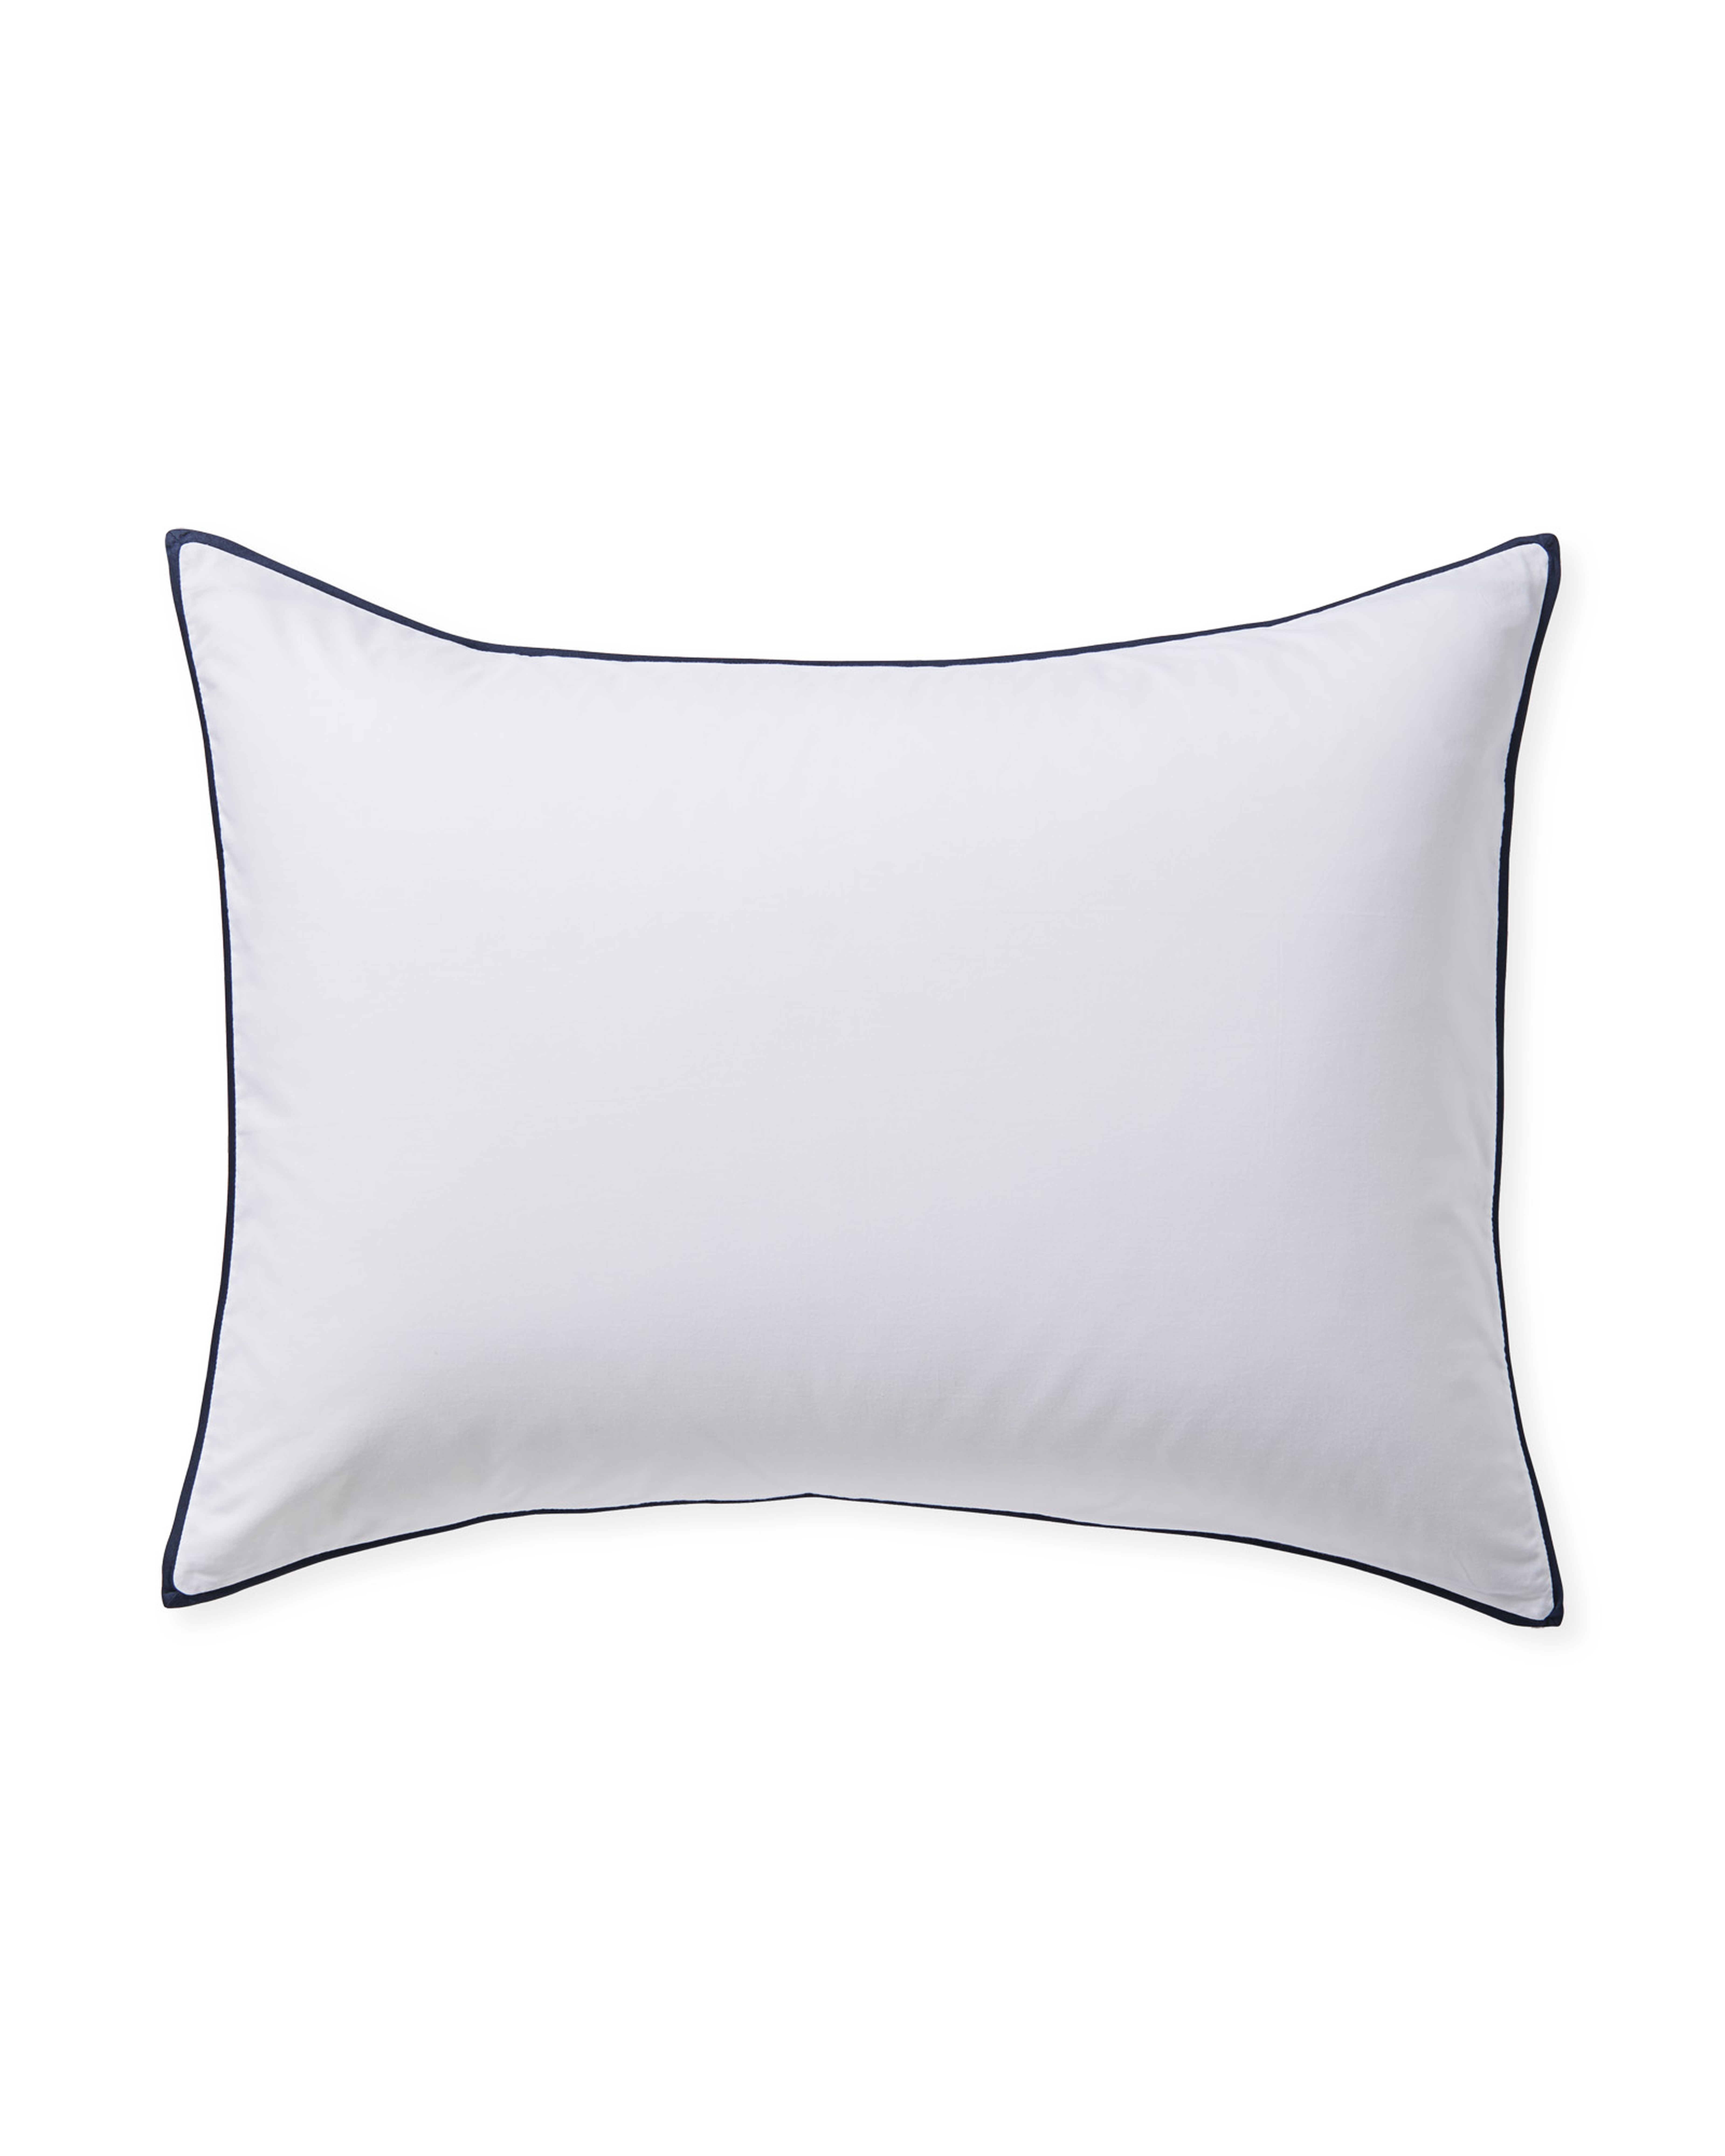 Beach Club Standard Sham - Midnight - Insert sold separately - Serena and Lily